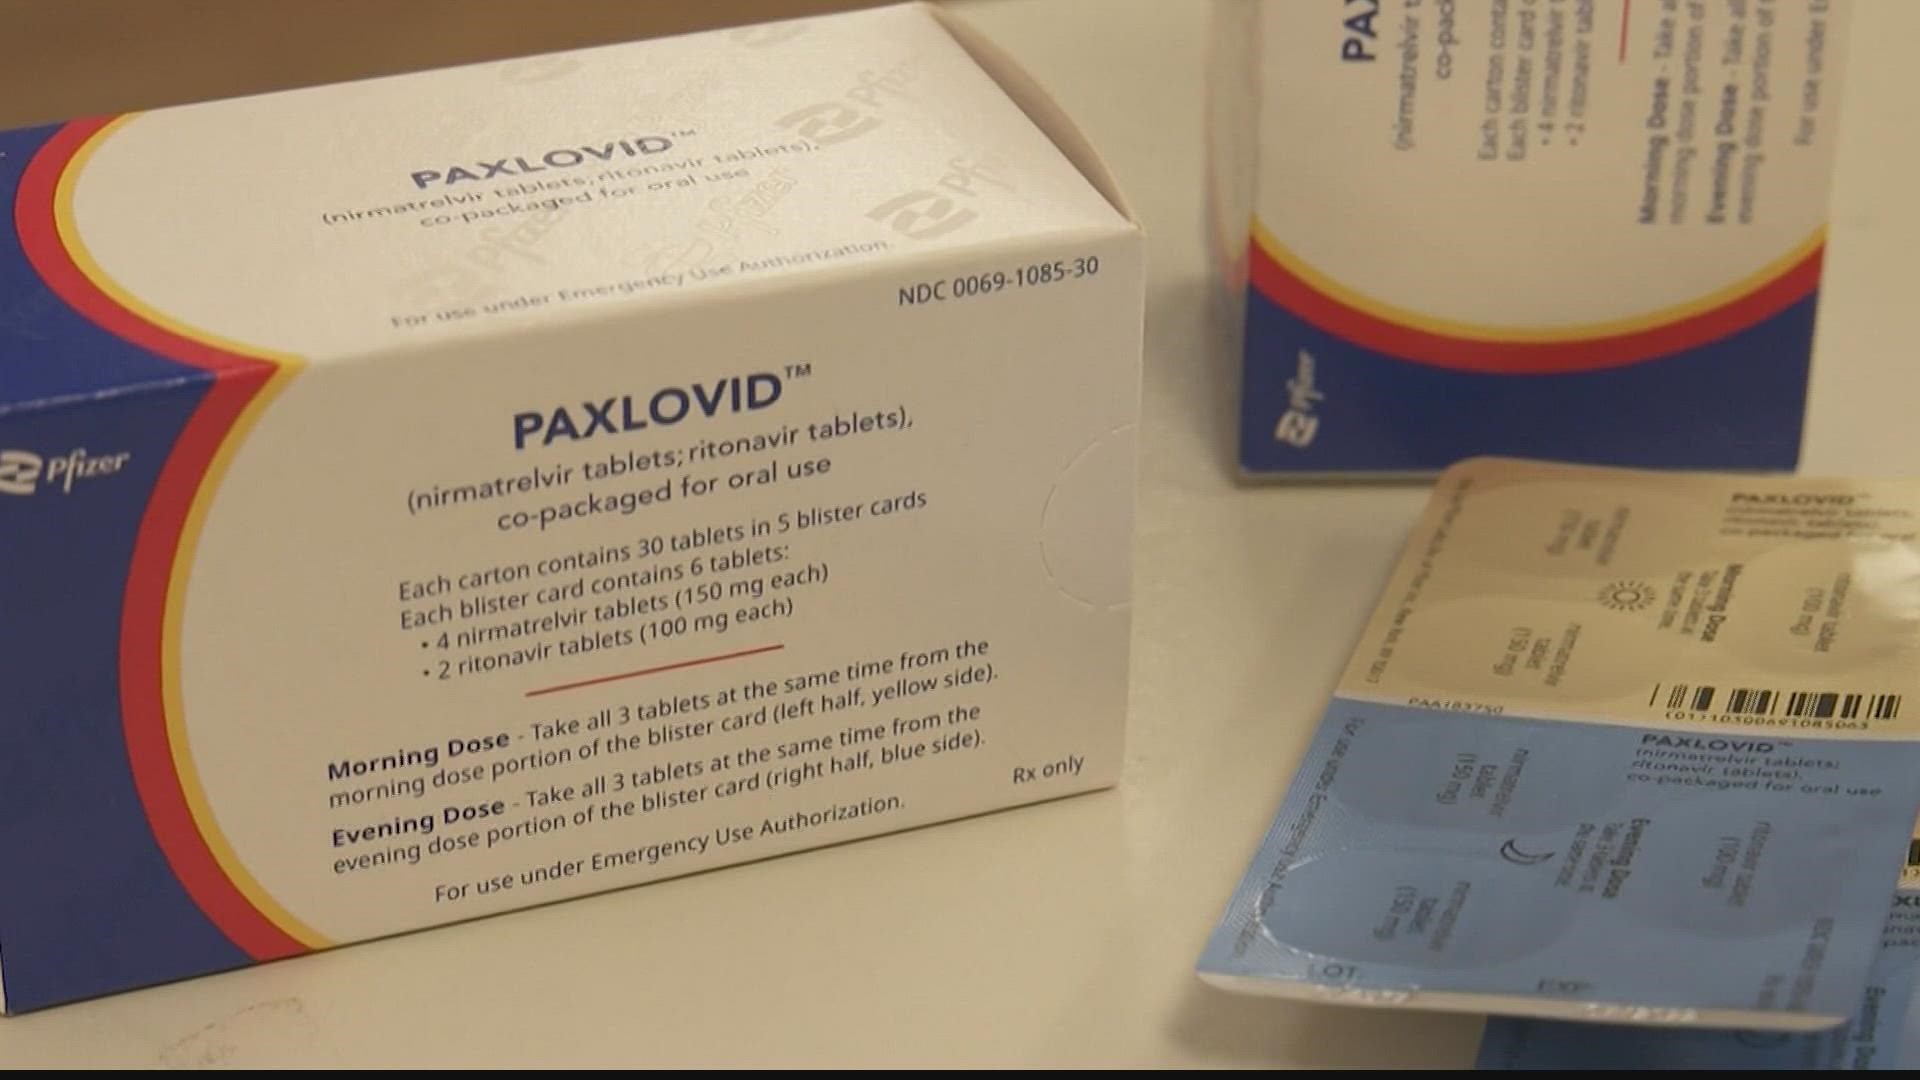 What to know if you are prescribed Paxlovid.